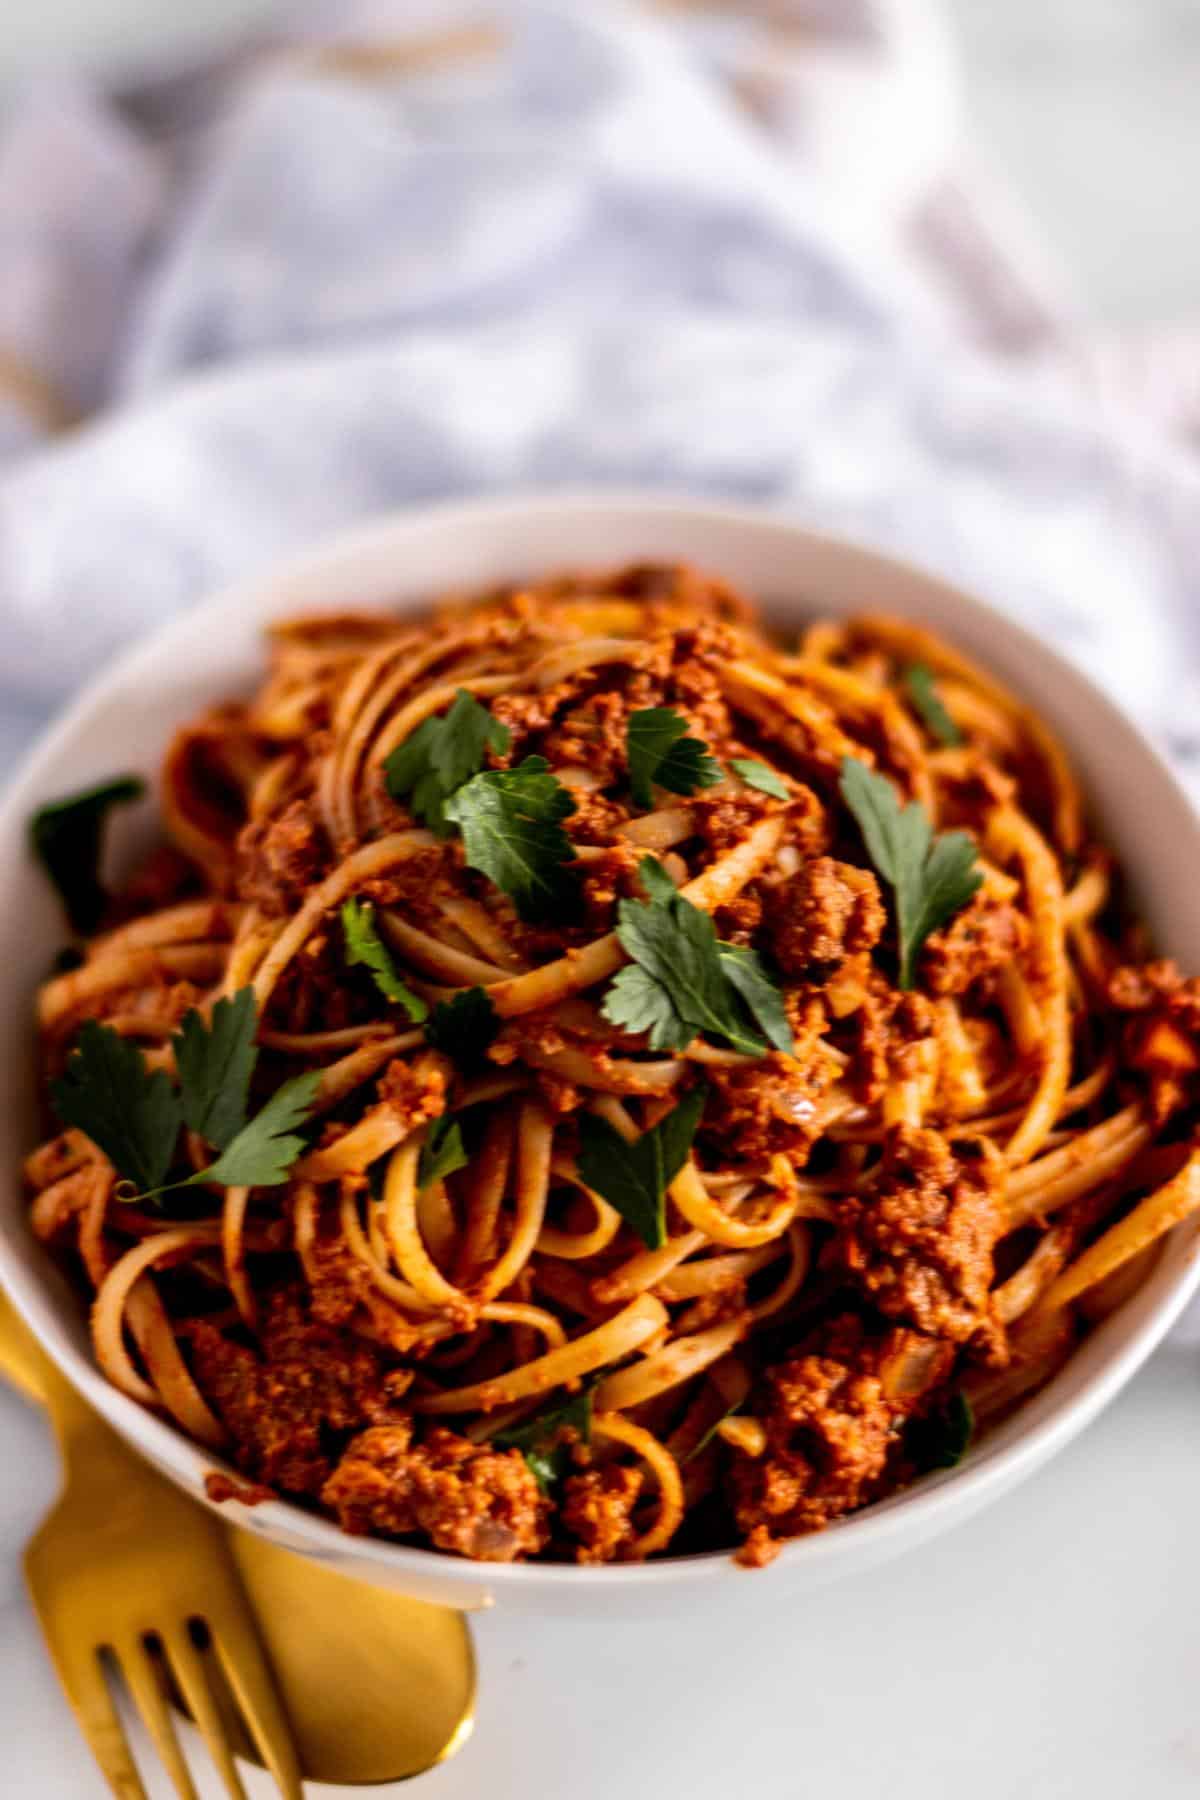 Bowl of linguine tossed with vegan meat sauce and topped with fresh parsley.